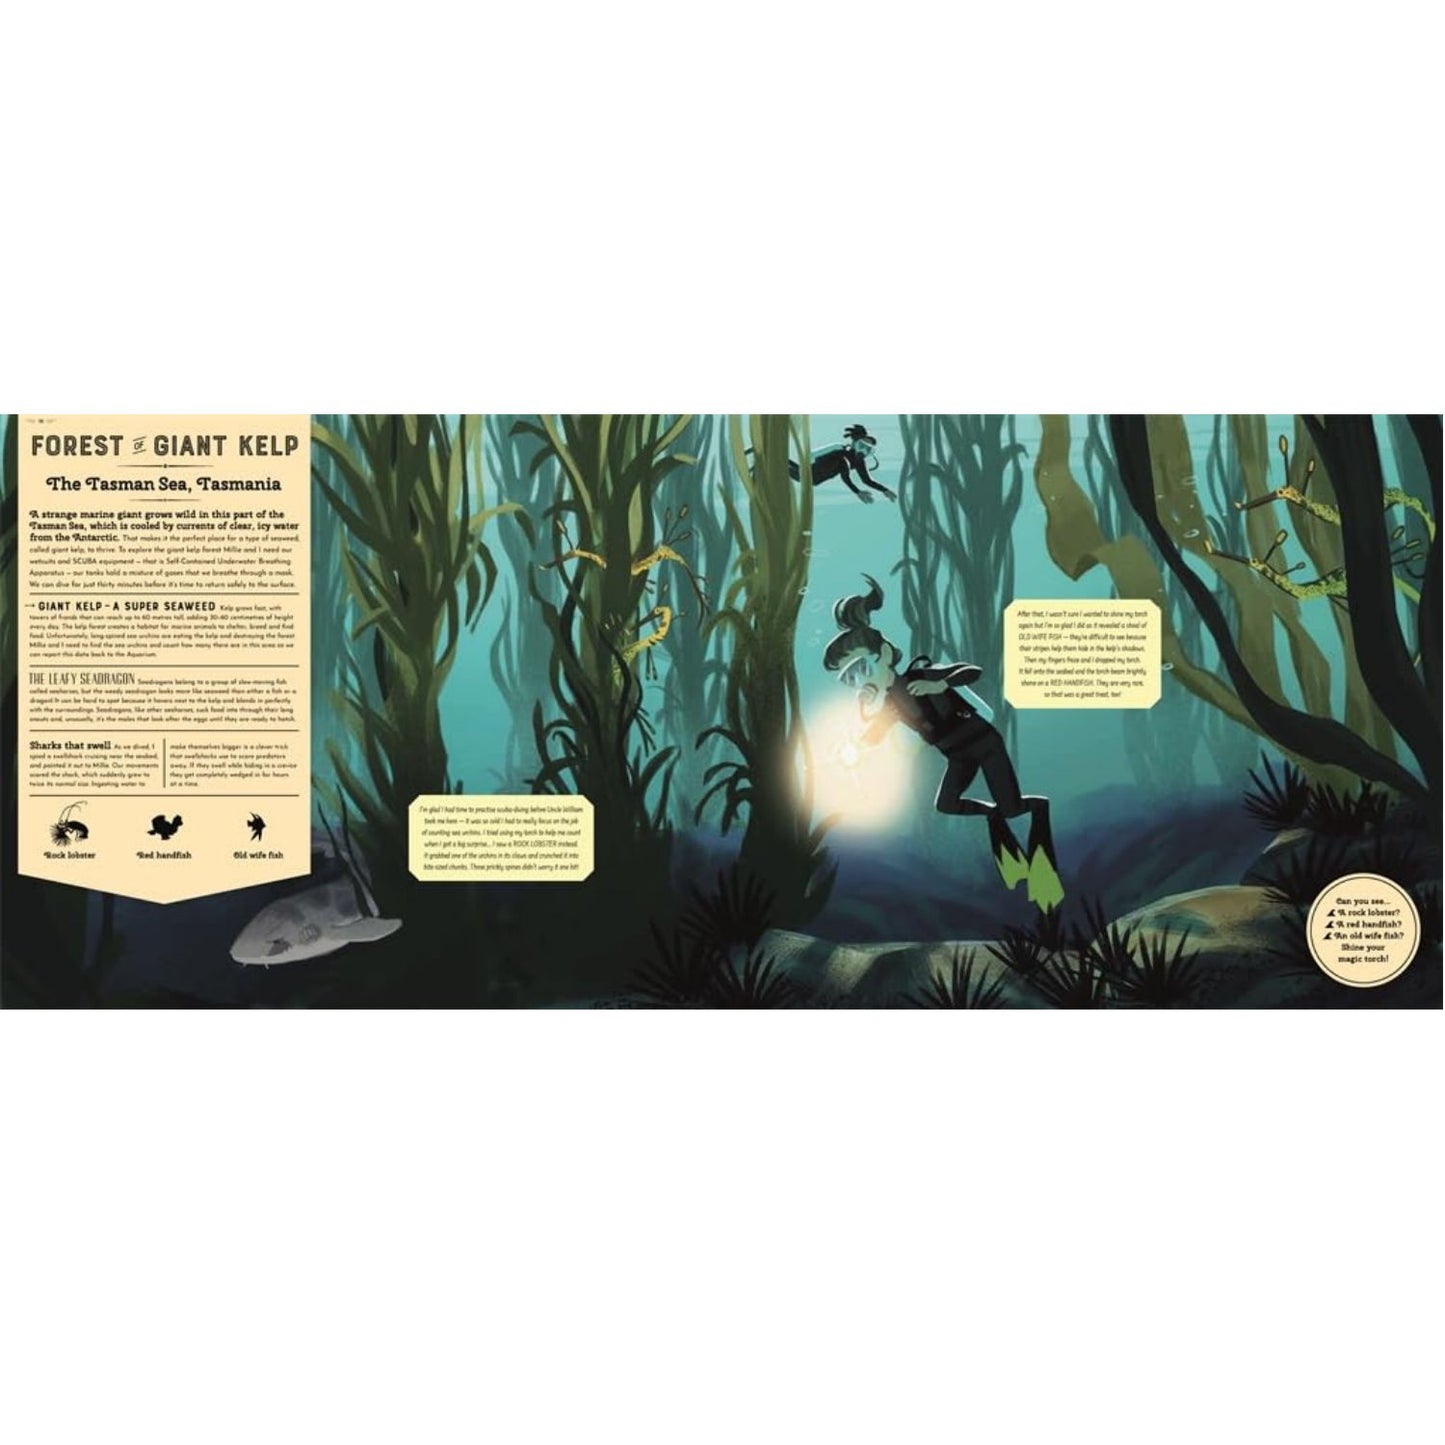 Mysteries of the Ocean: Includes Magic Torch Which Illuminates More Than 50 Marine Animals | Children’s Book on Oceans & Seas